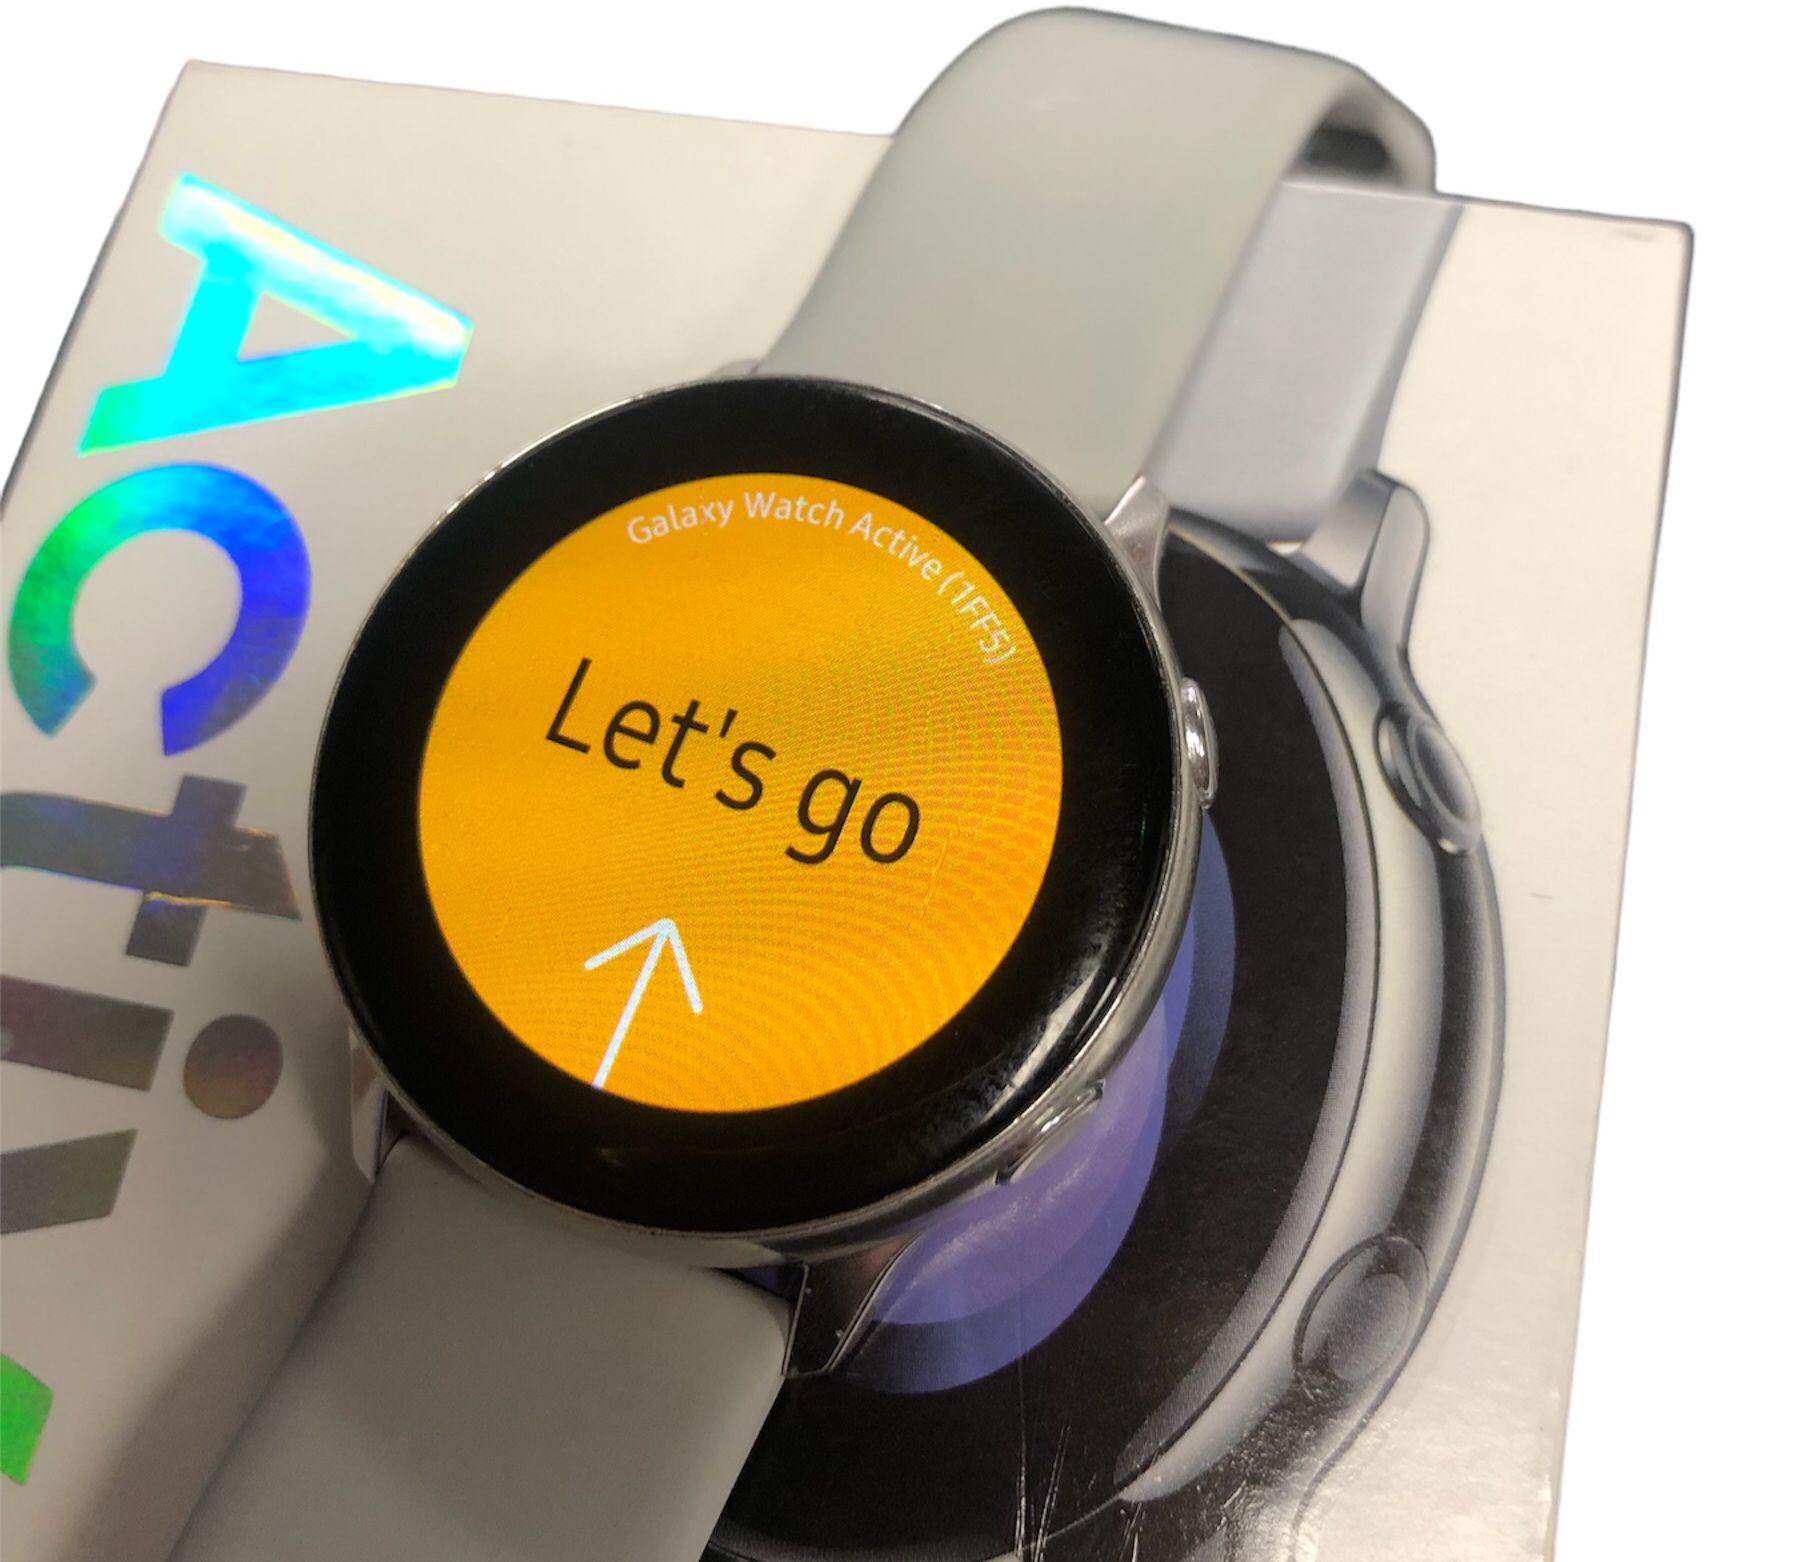 Samsung Galaxy Watch Active - Box Included